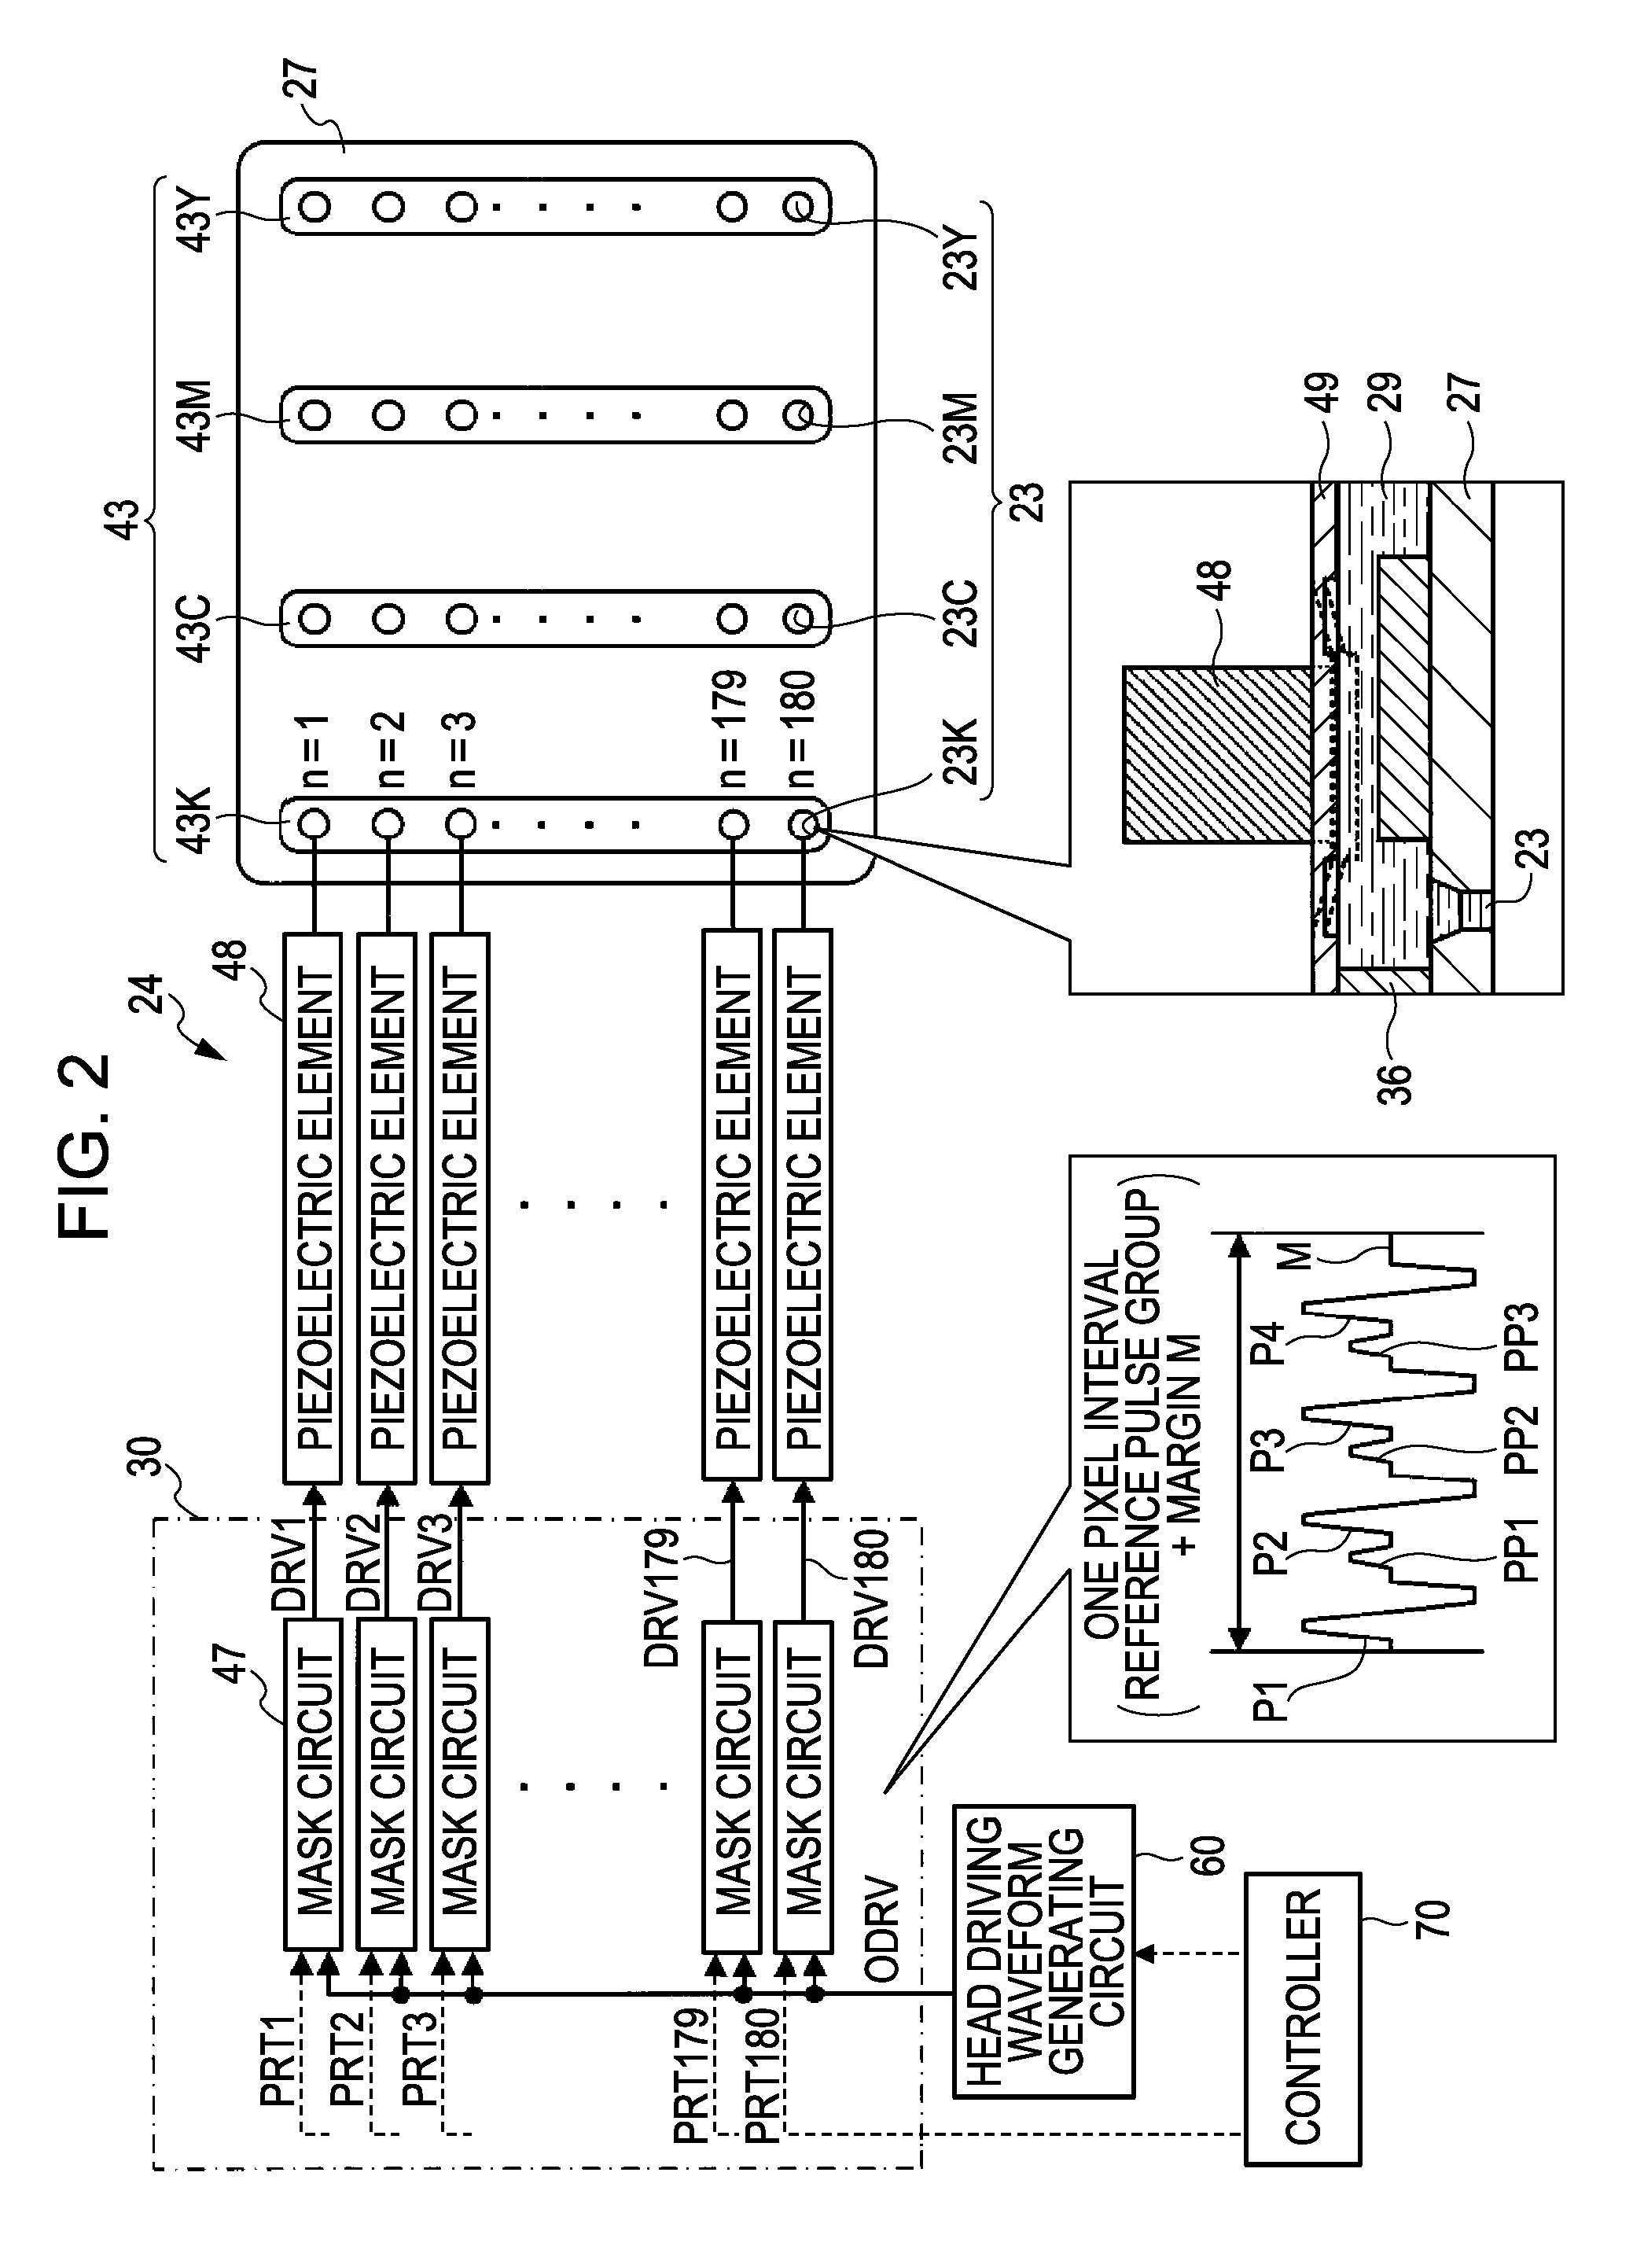 Liquid discharging apparatus, method of controlling the same, and program that implements the method